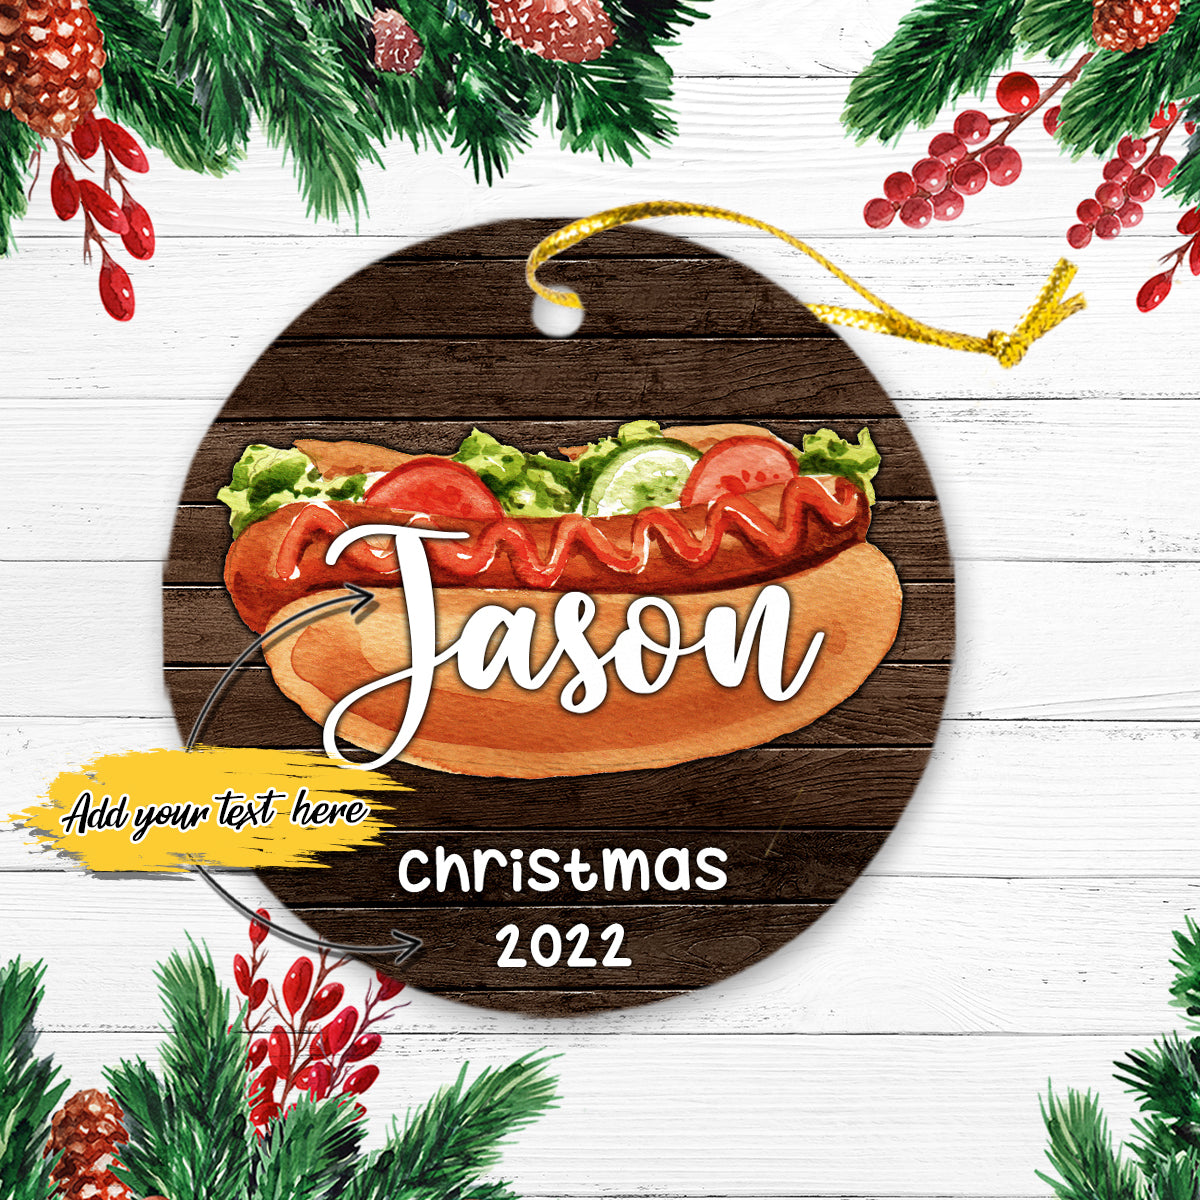 Hot Dog Personalized Christmas Premium Ceramic Ornaments Sets for Christmas Tree